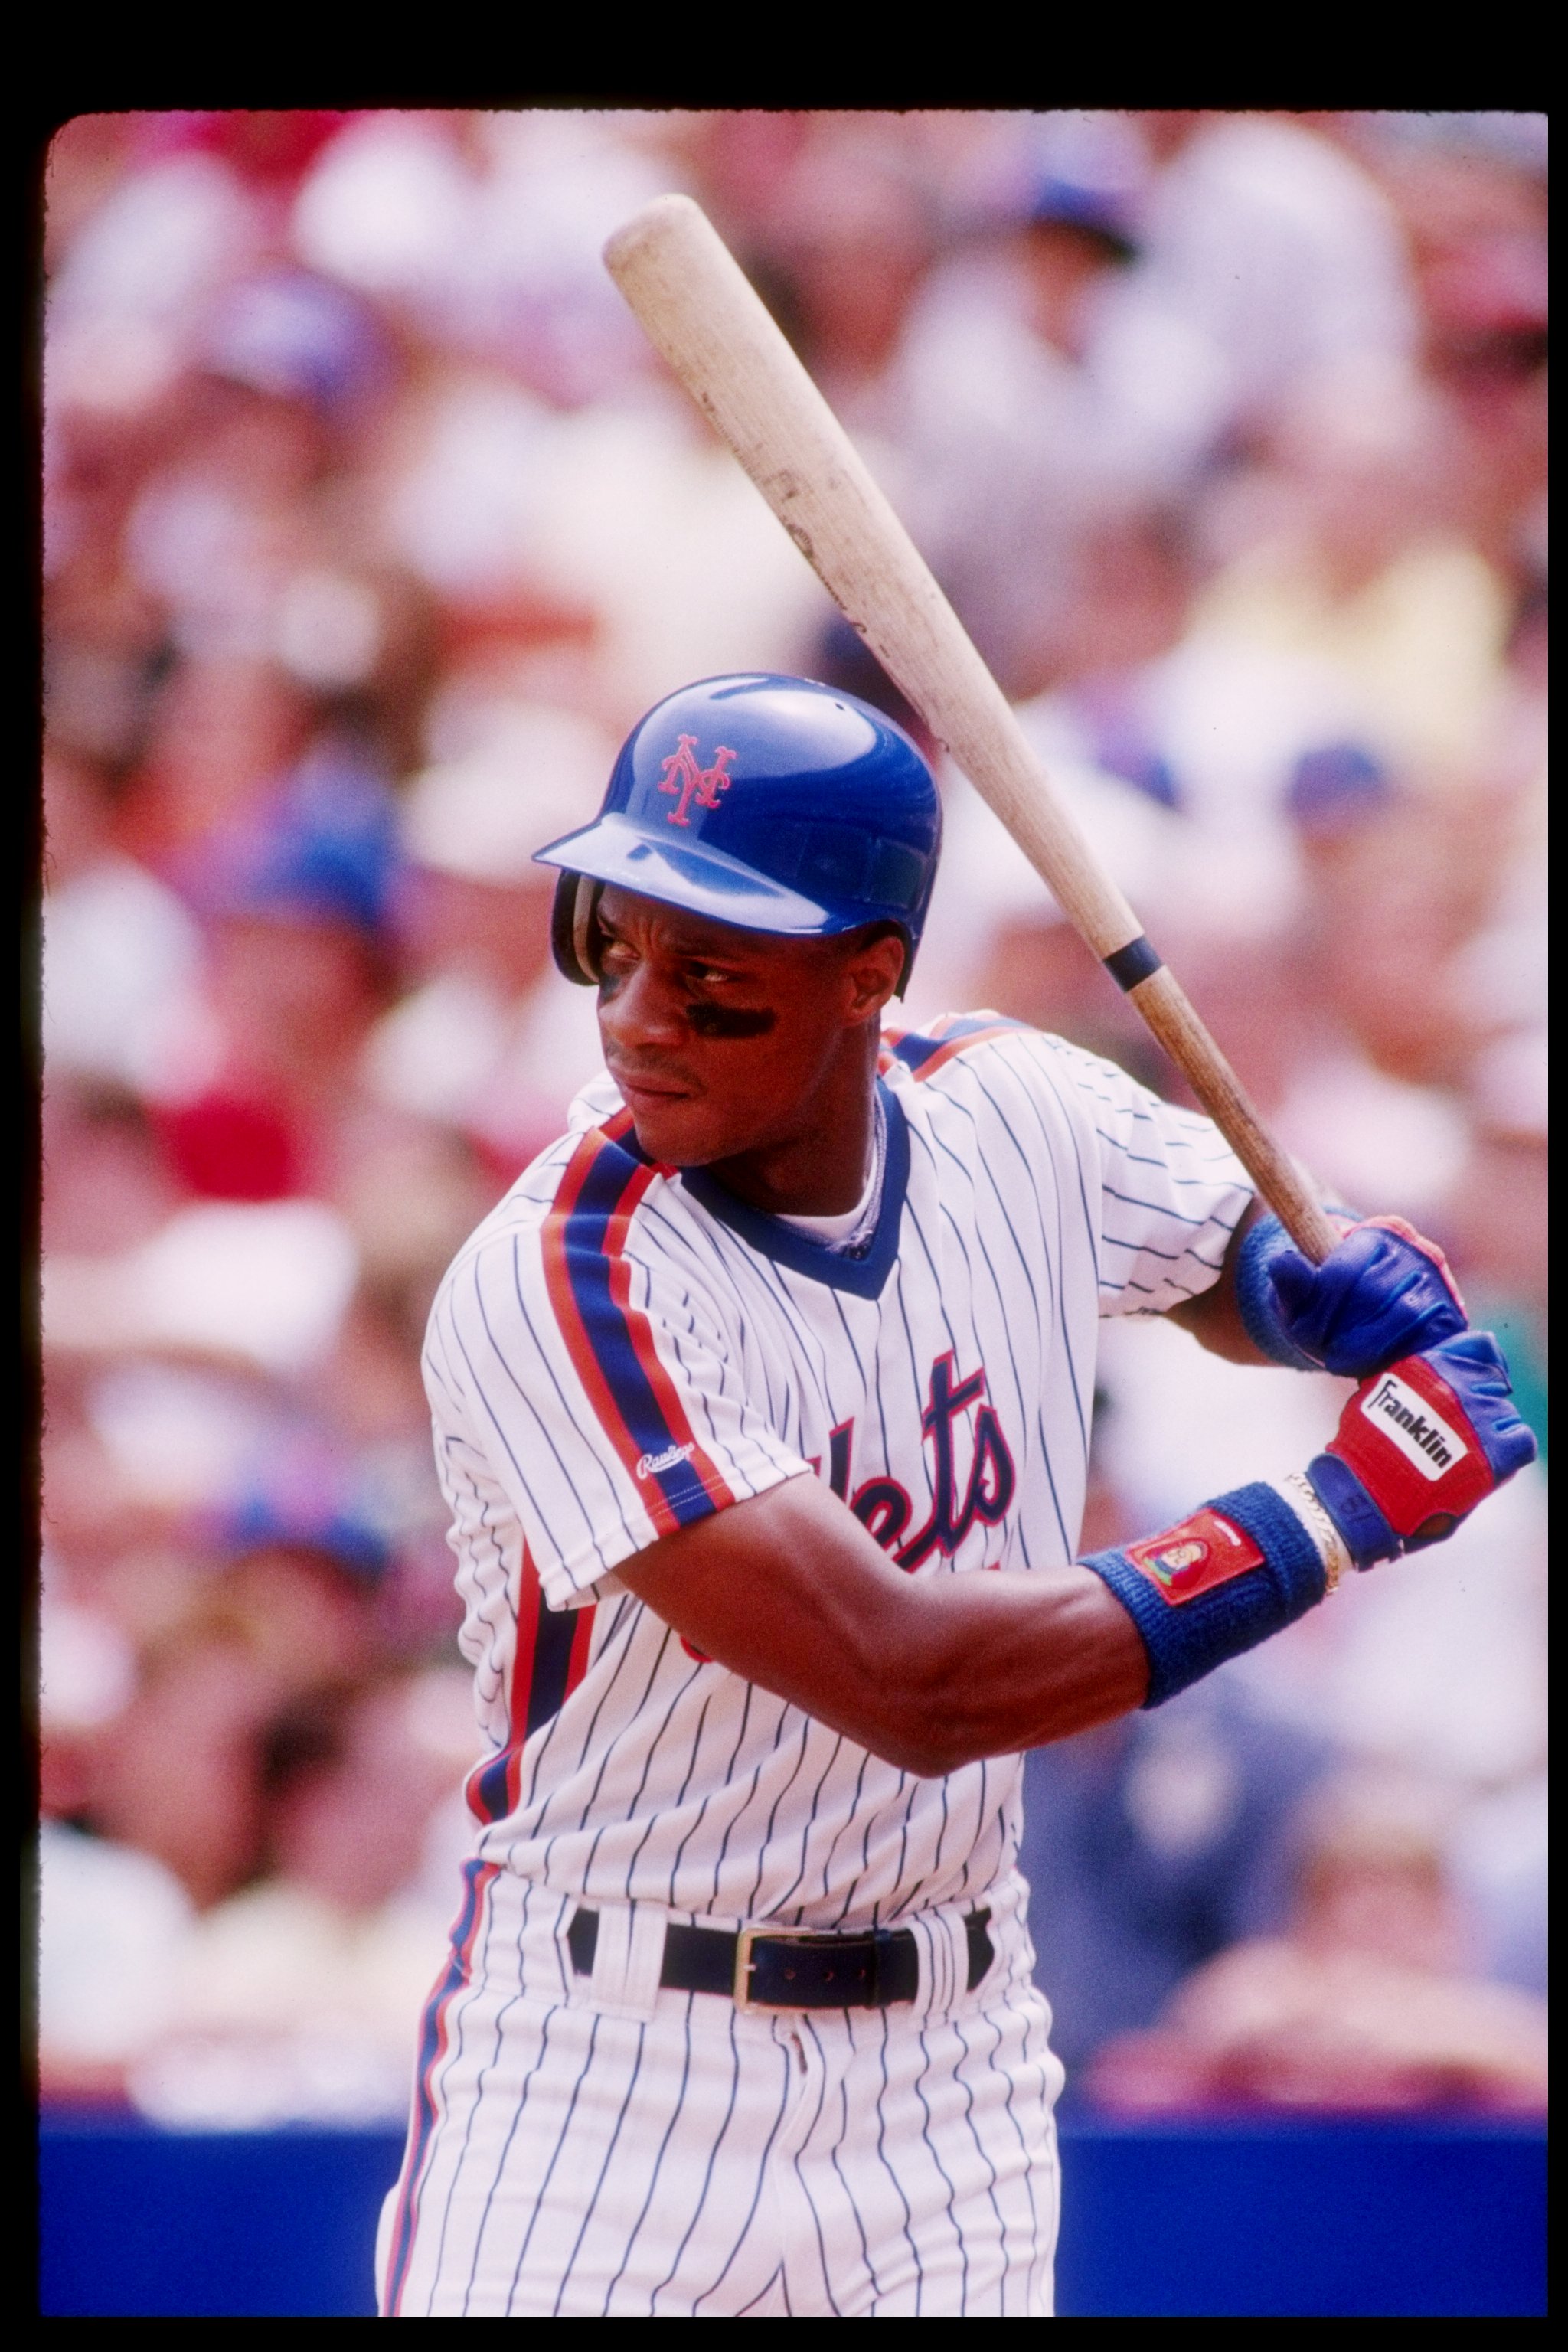 SNY on X: Darryl Strawberry will be gifting one lucky winner a